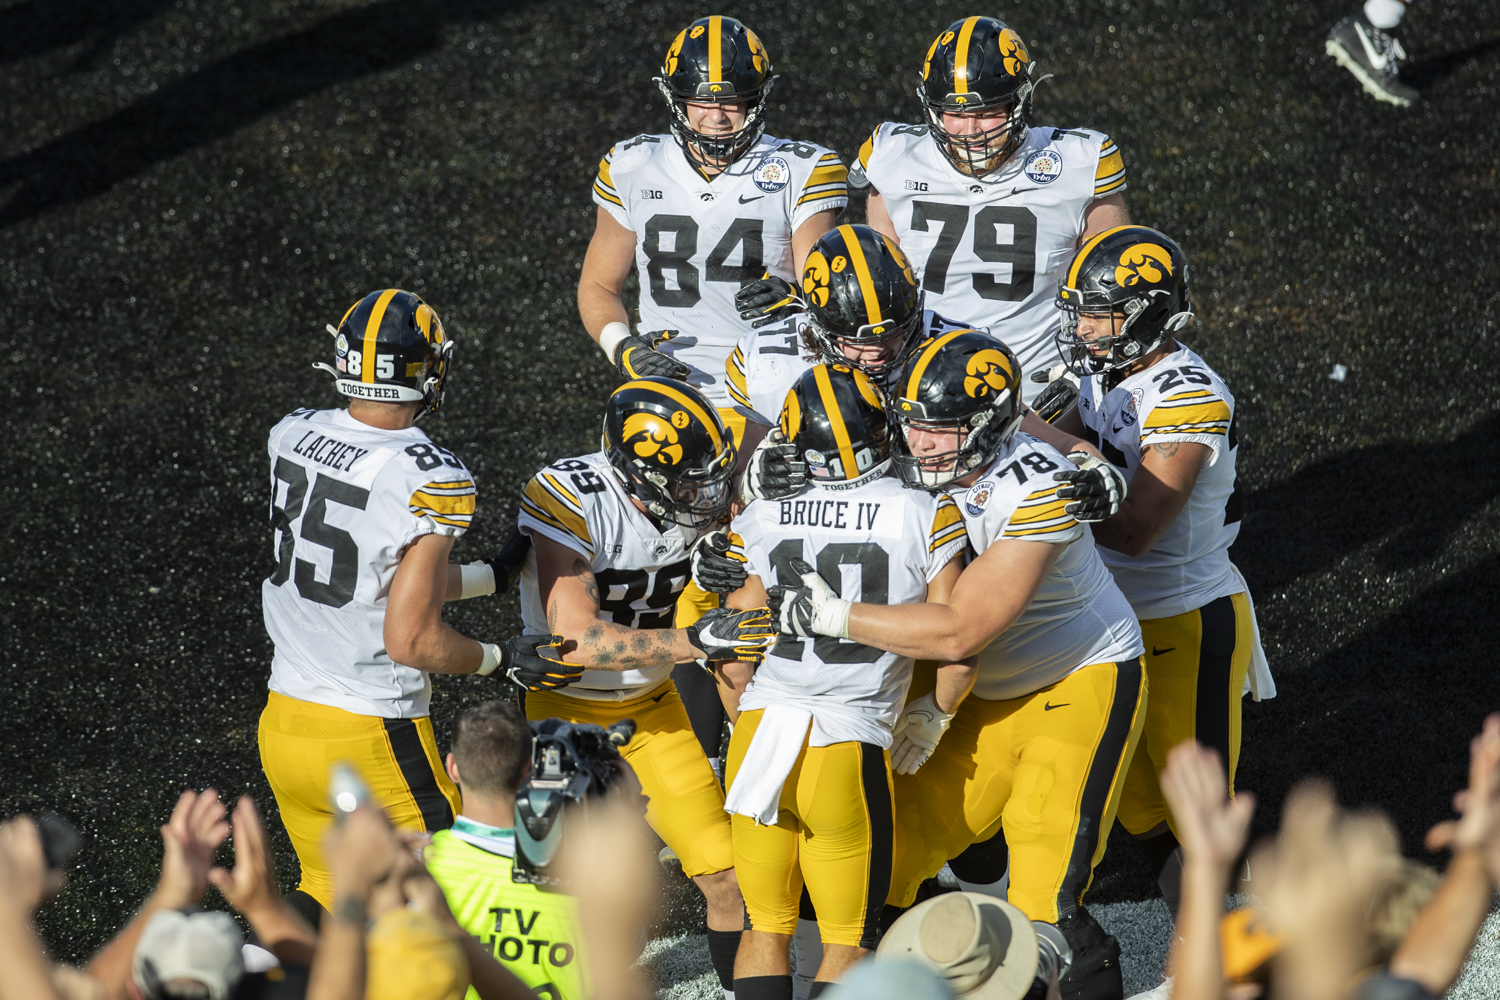 Watch: Iowa's Arland Bruce runs 20 yards for a touchdown - The